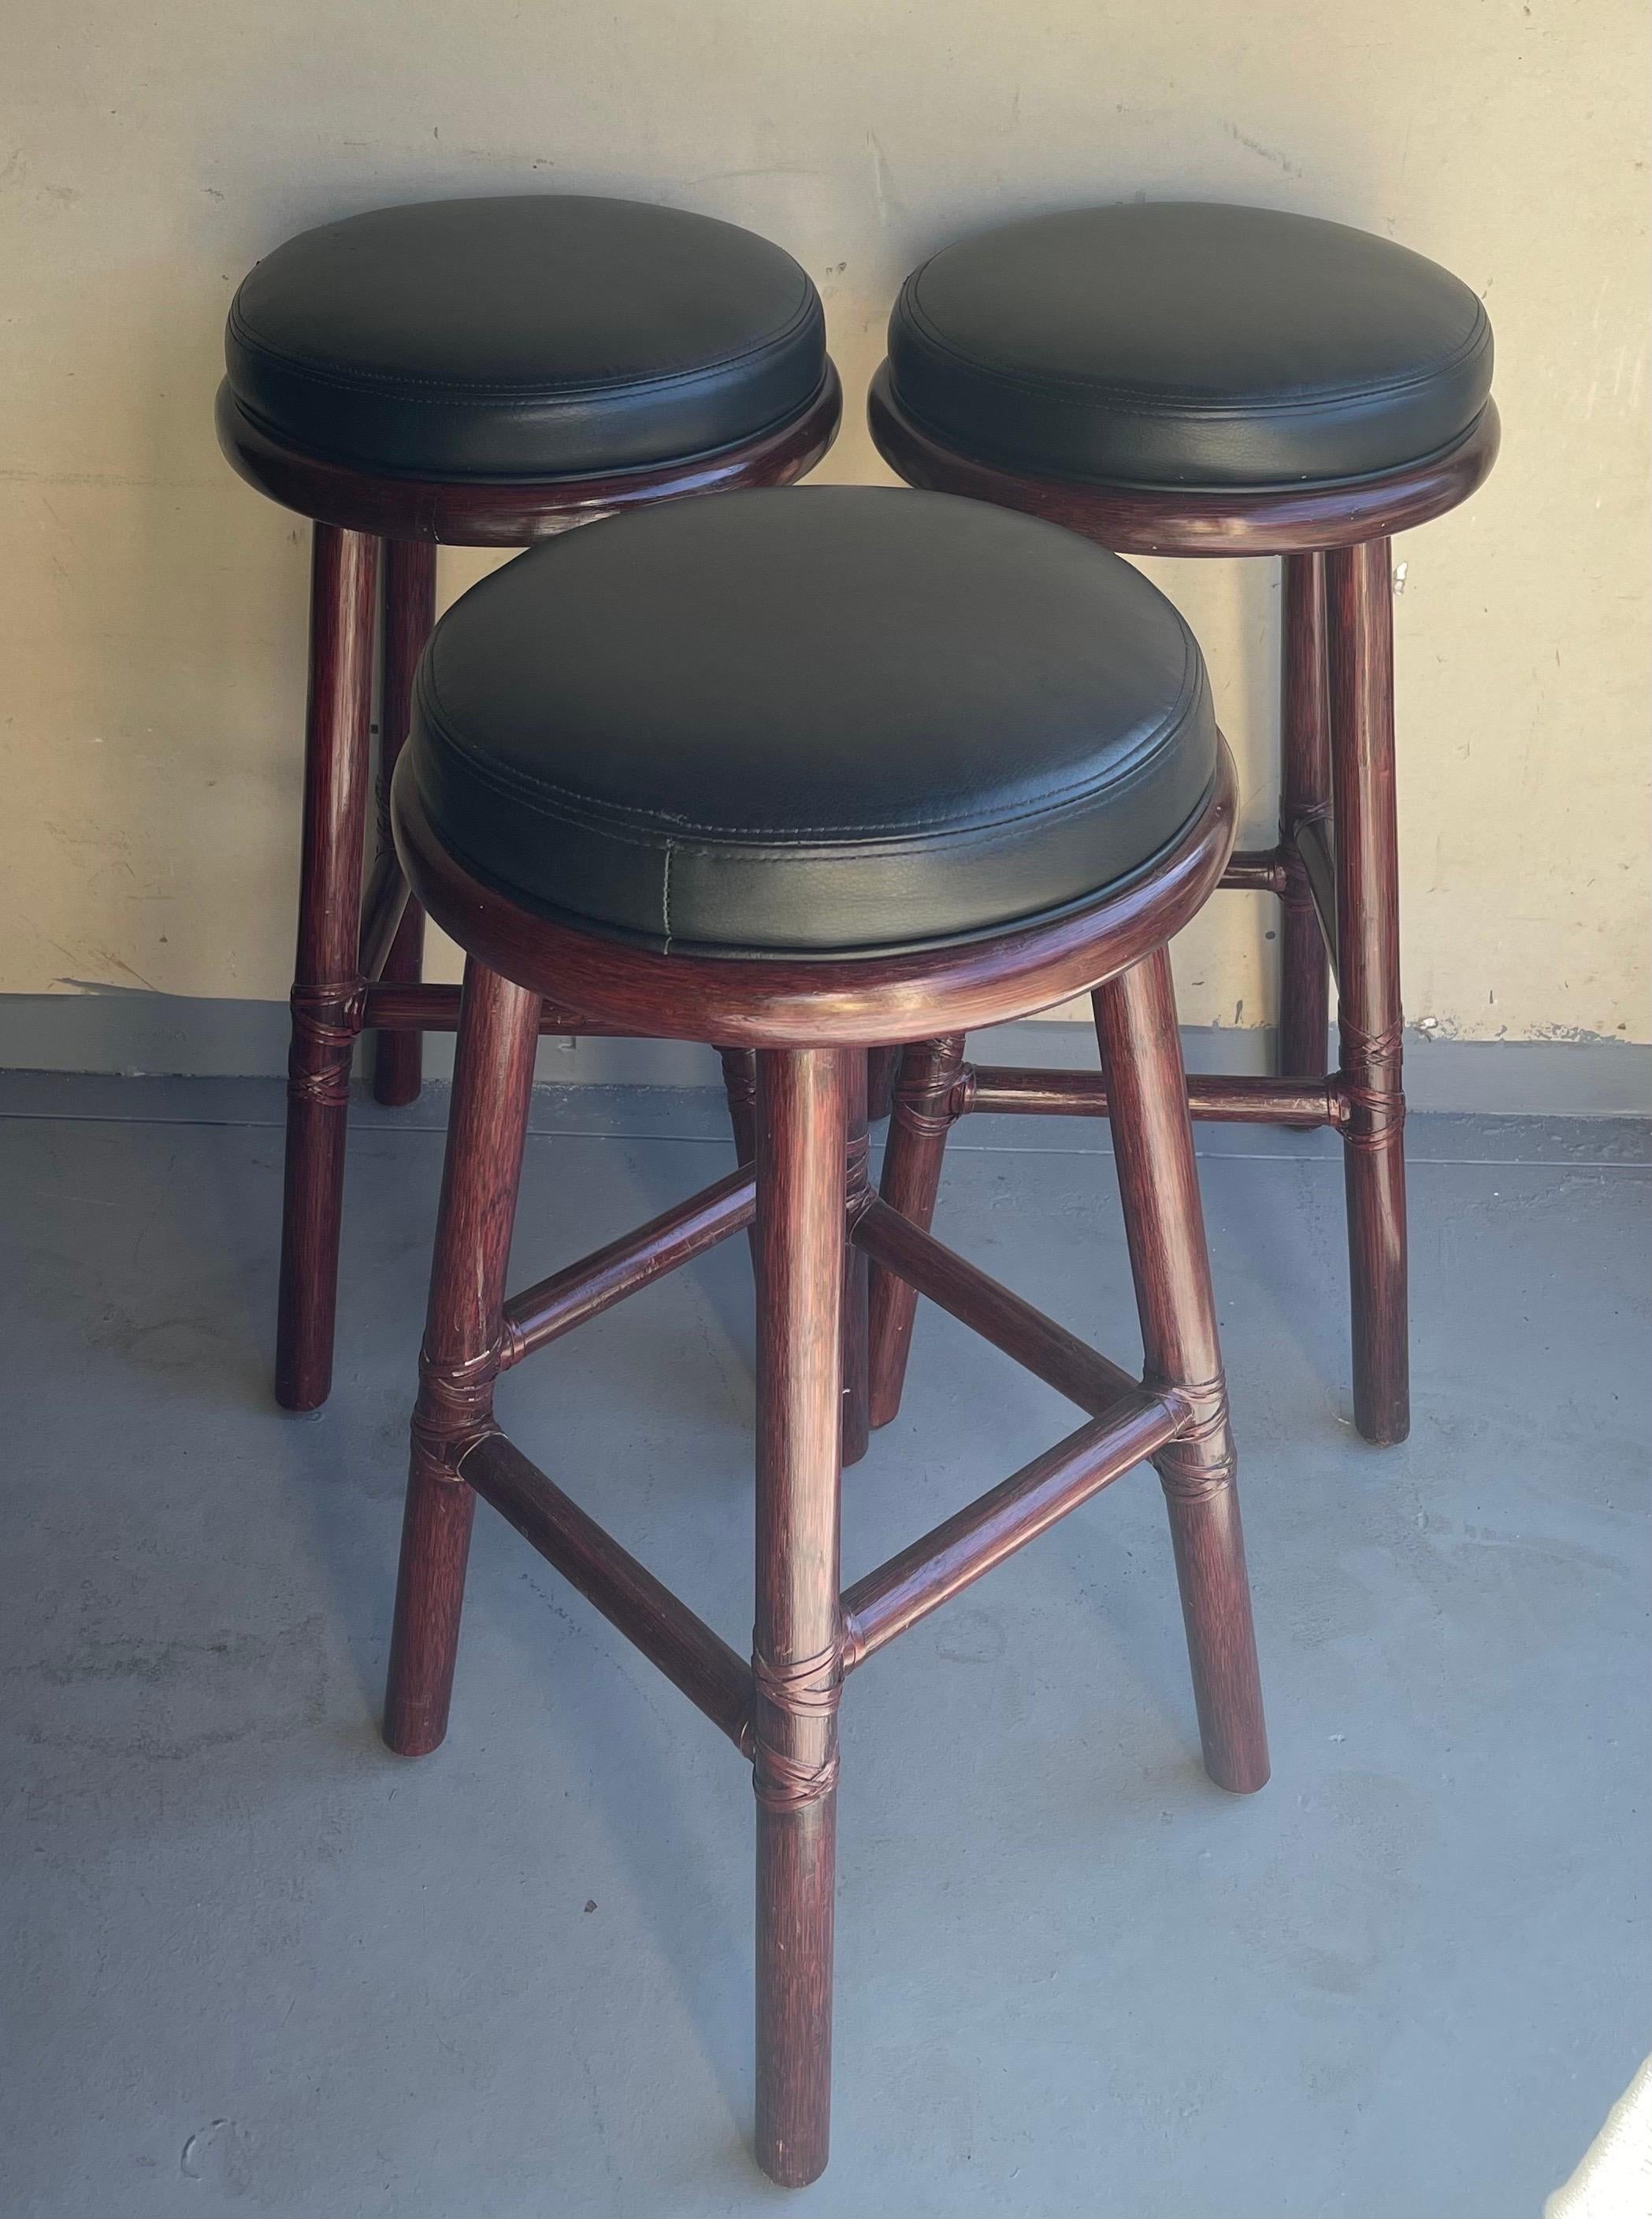 Organic Modern Set of Three Bamboo & Leather Bar Stools by McGuire Furniture Co. For Sale